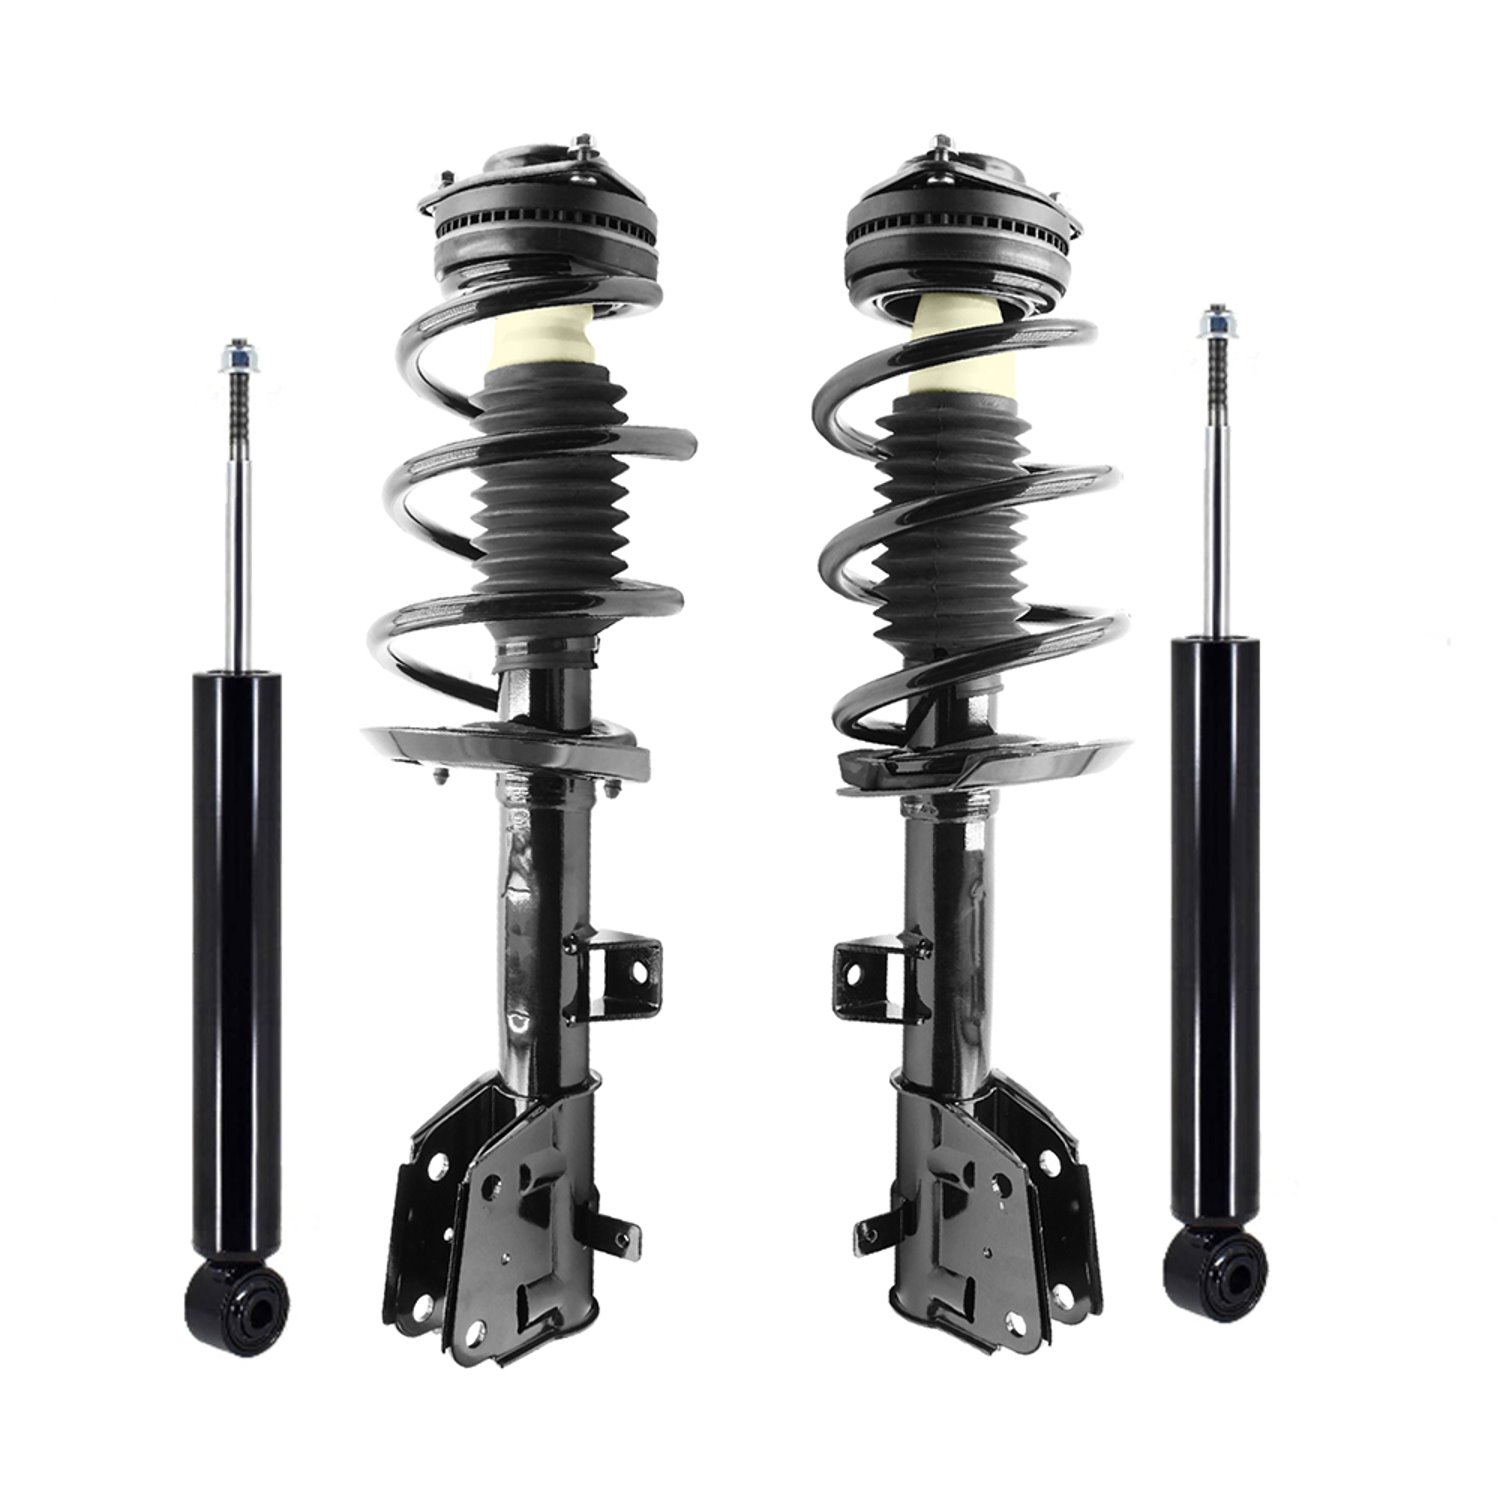 4-13681-253410-001 Front & Rear Complete Strut Assembly Shock Absorber Kit Fits Select Chrysler Pacifica